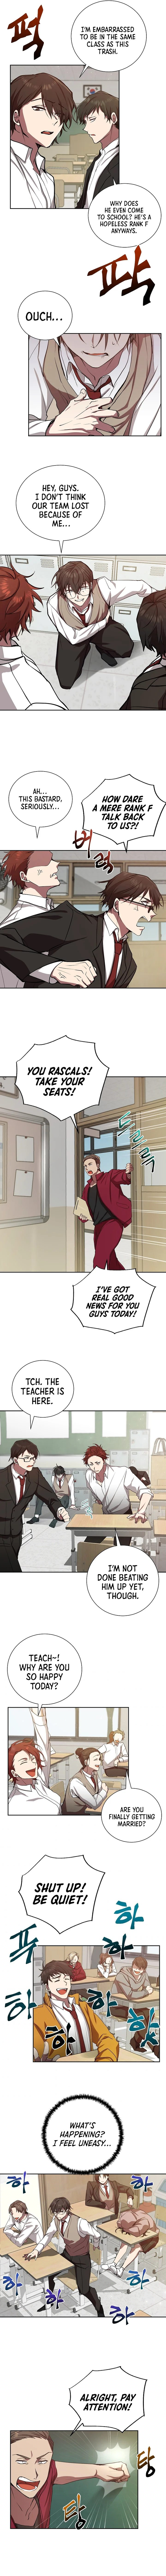 My School Life Pretending To Be a Worthless Person - Chapter 1 Page 8